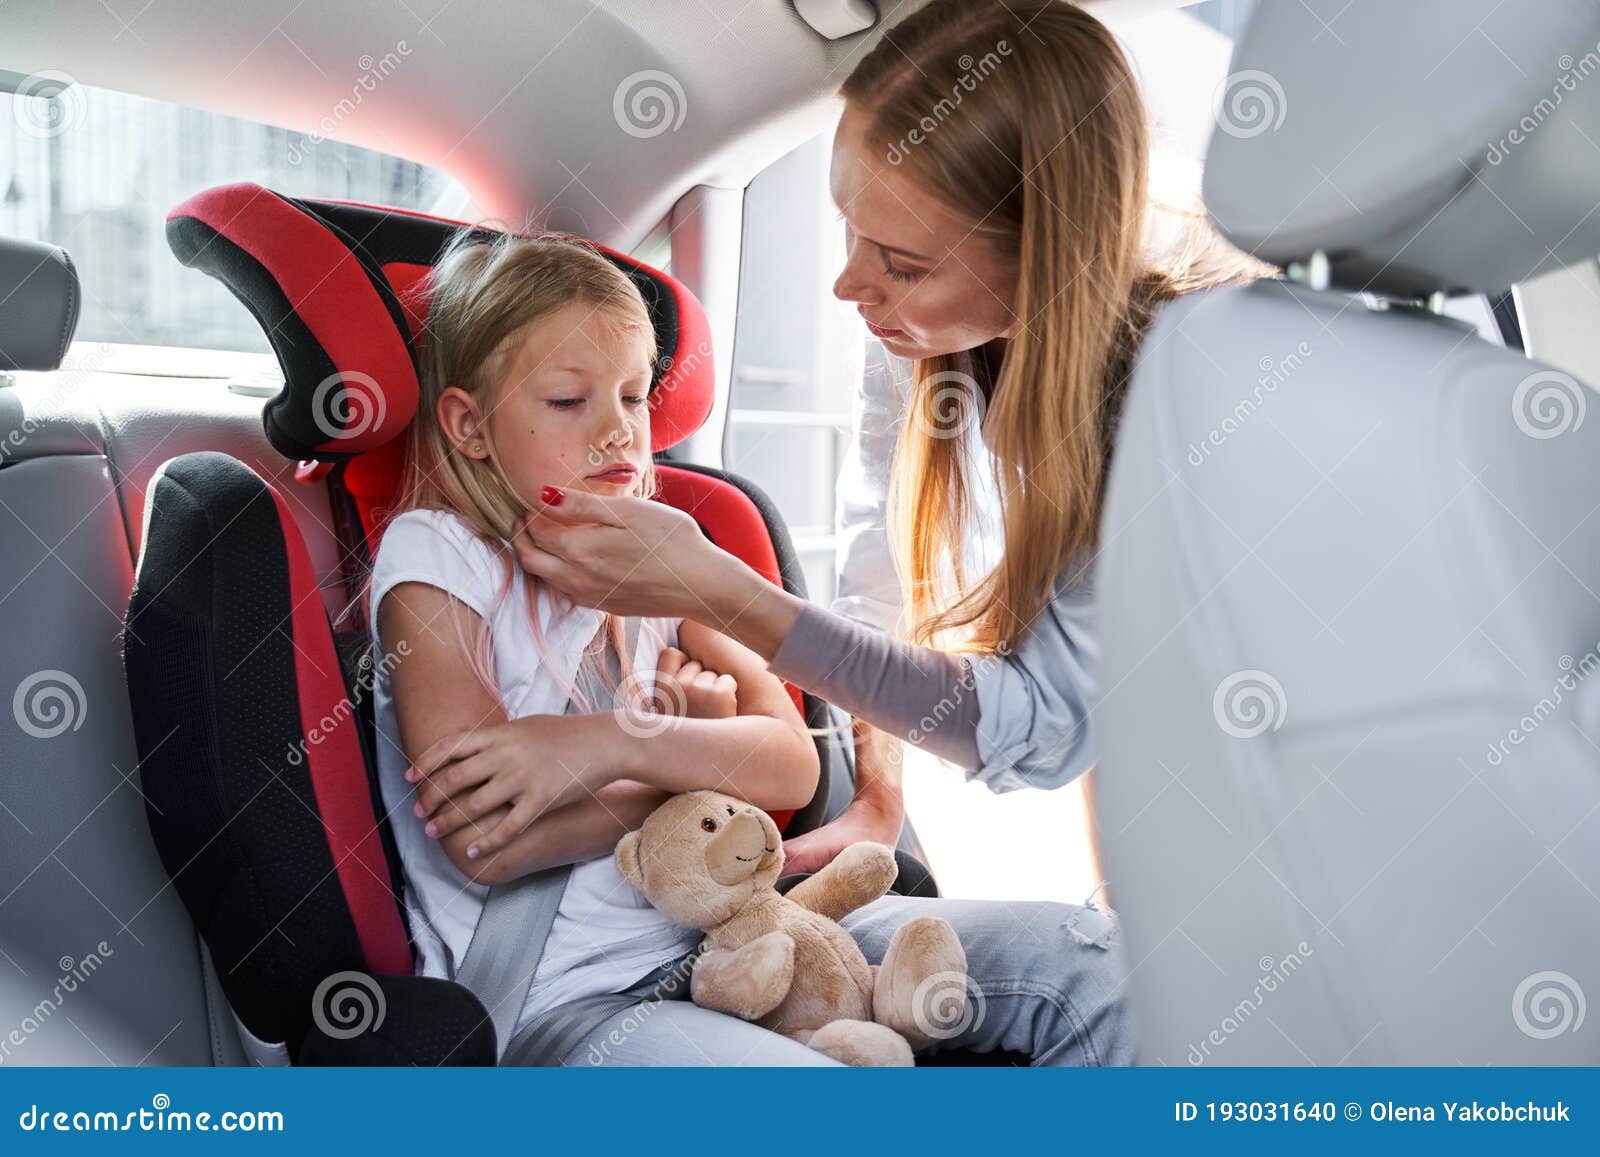 Mother Taking Care of Child in Car Stock Photo - Image of embrace,  insurance: 193031640